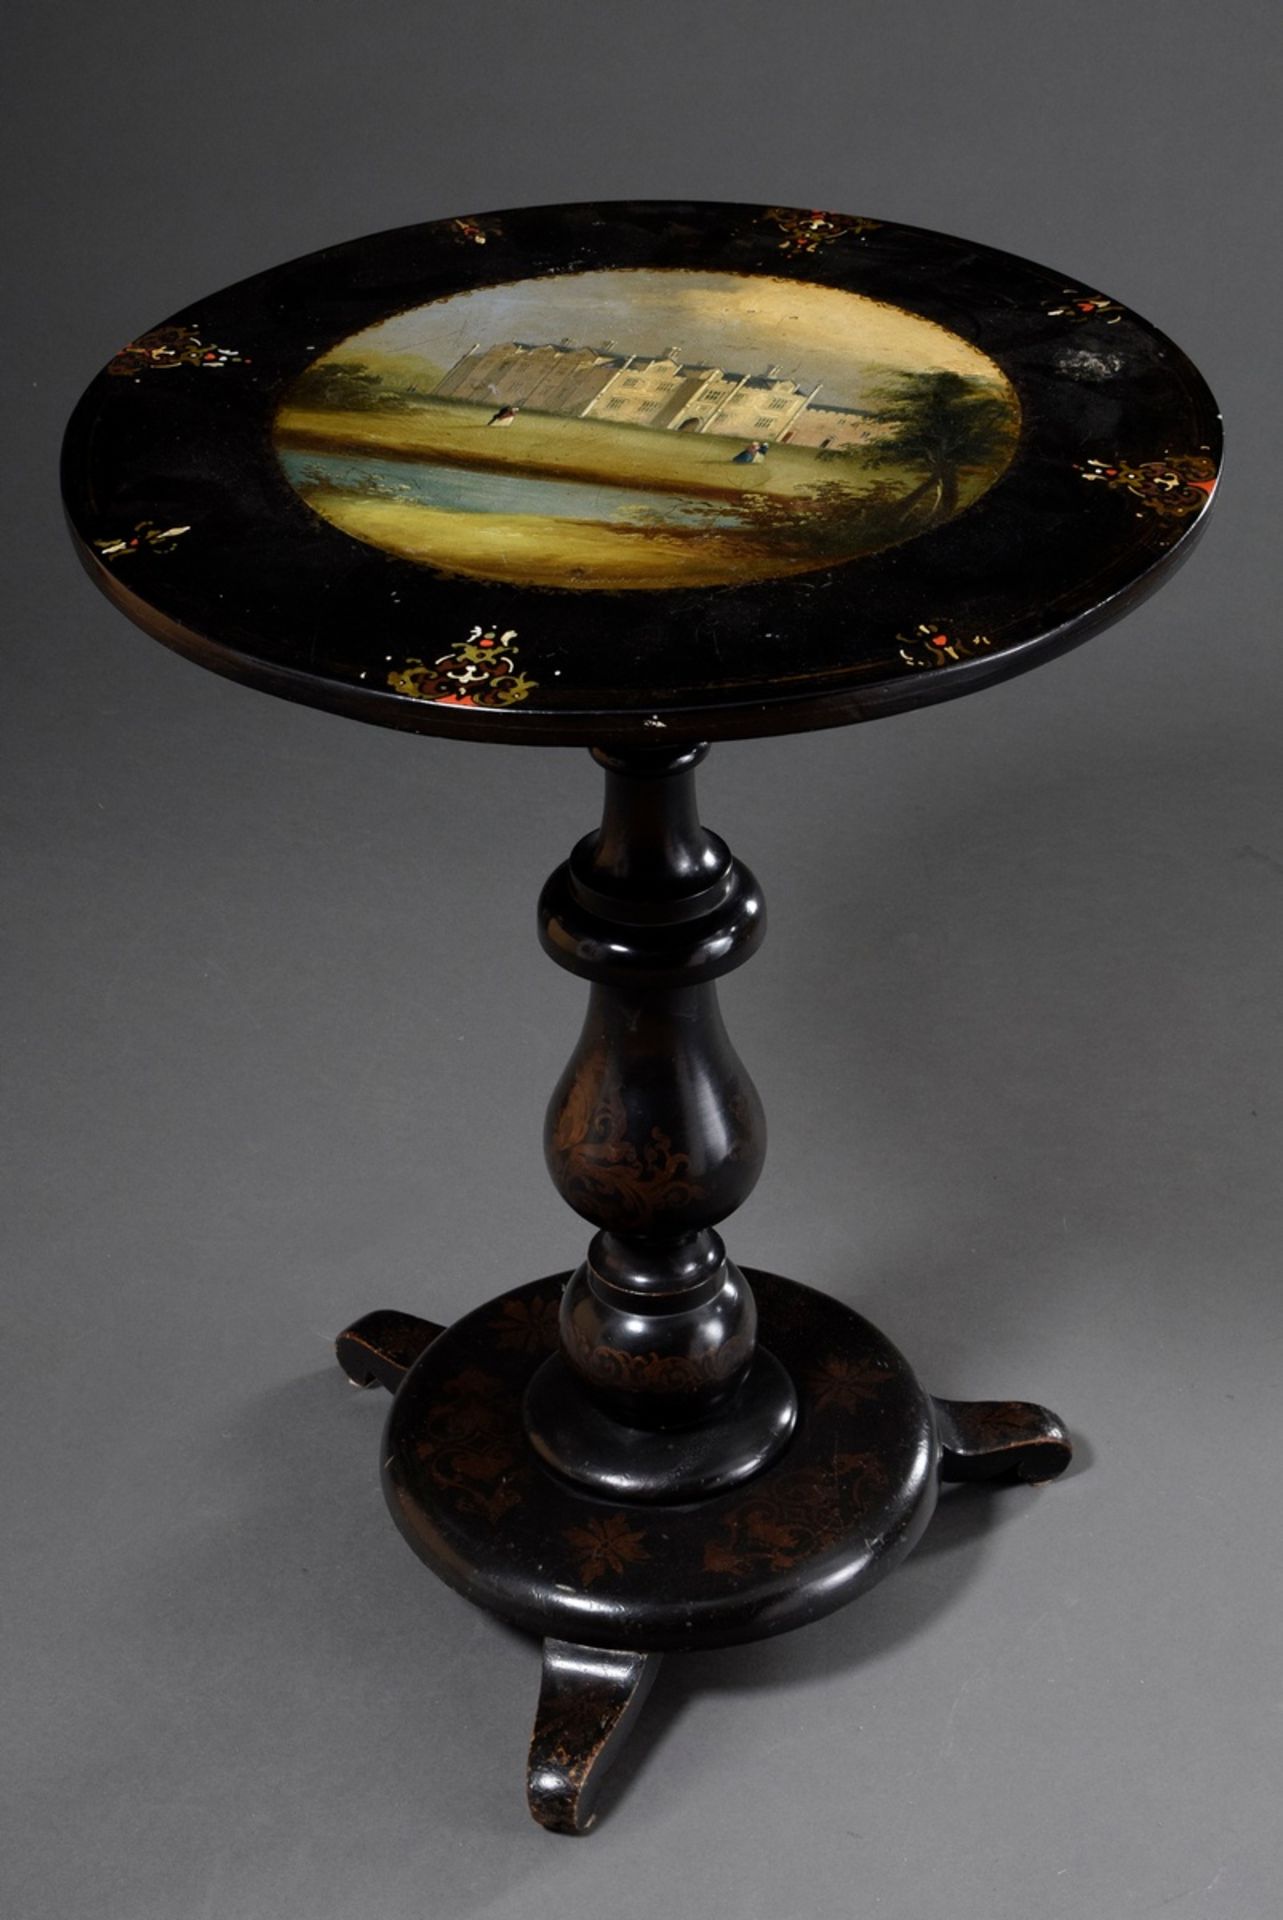 Small black lacquer table with polychrome painting "Tudor Castle" on the top, England 2nd half 19th